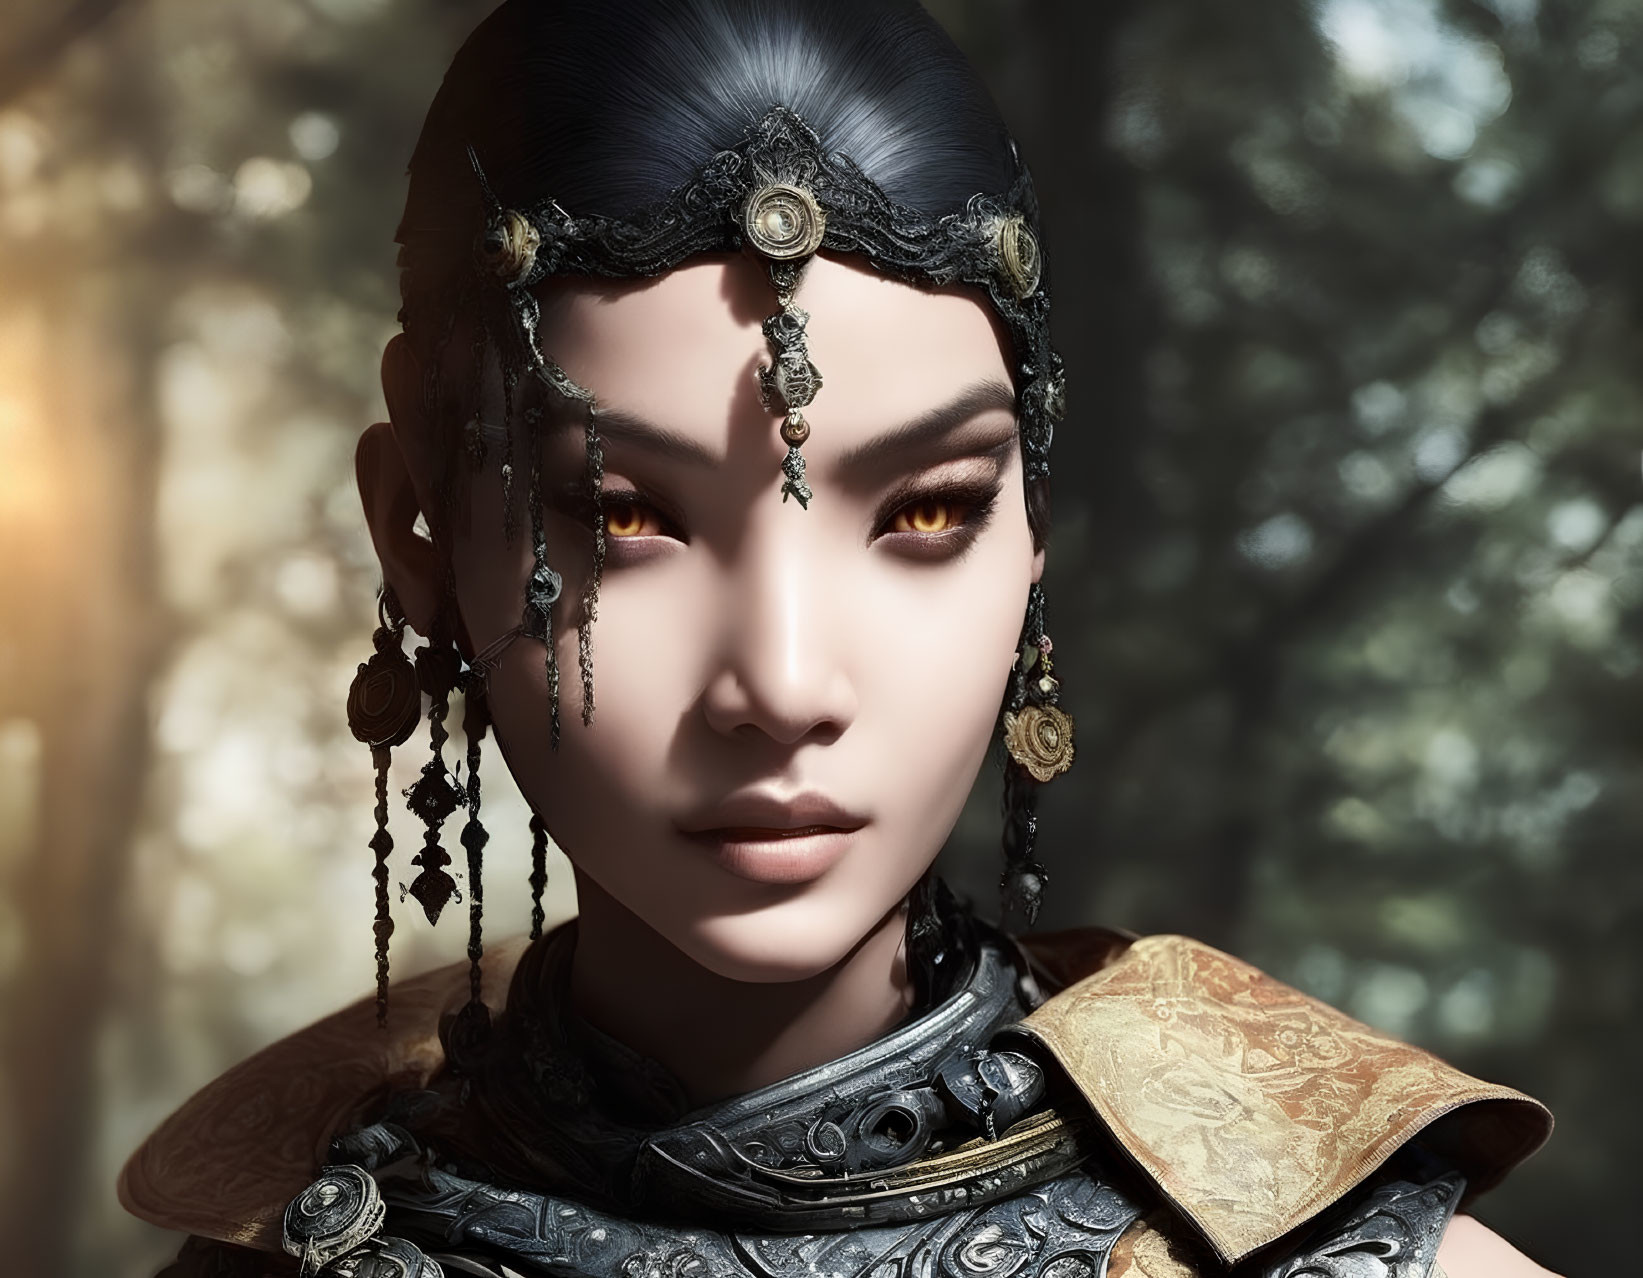 Detailed Armor and Striking Makeup Portrait in Forest Setting